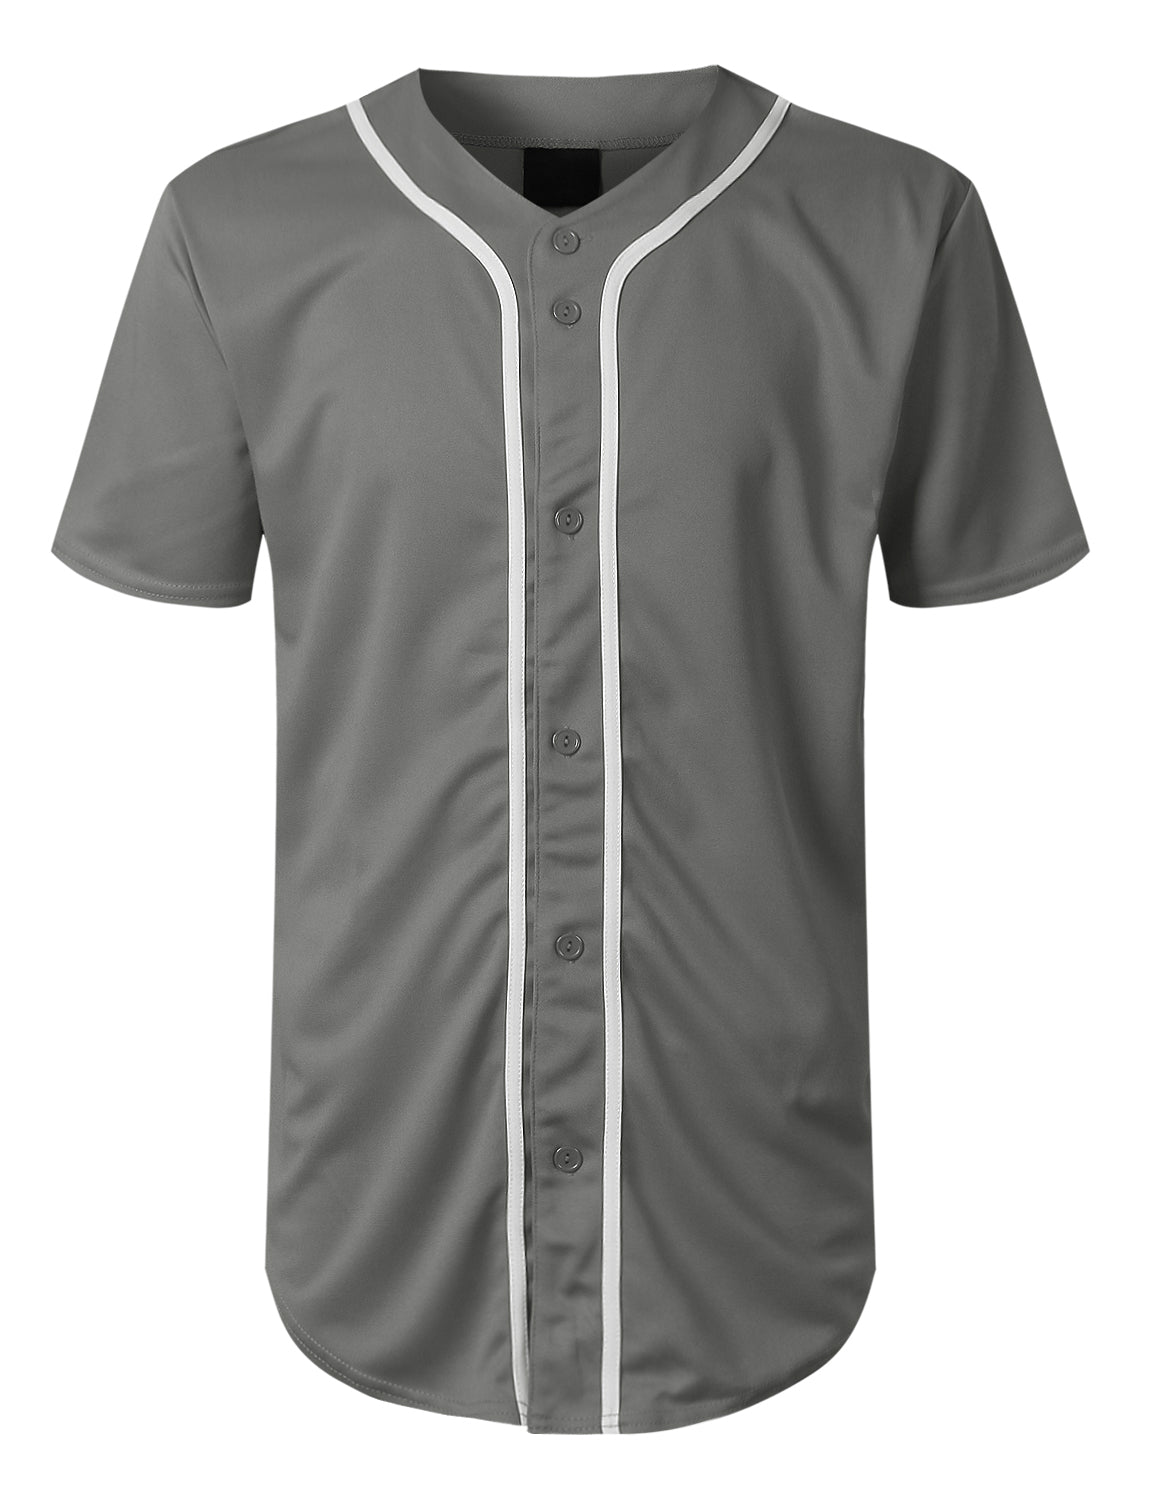 Solid Button Down Baseball Jersey 